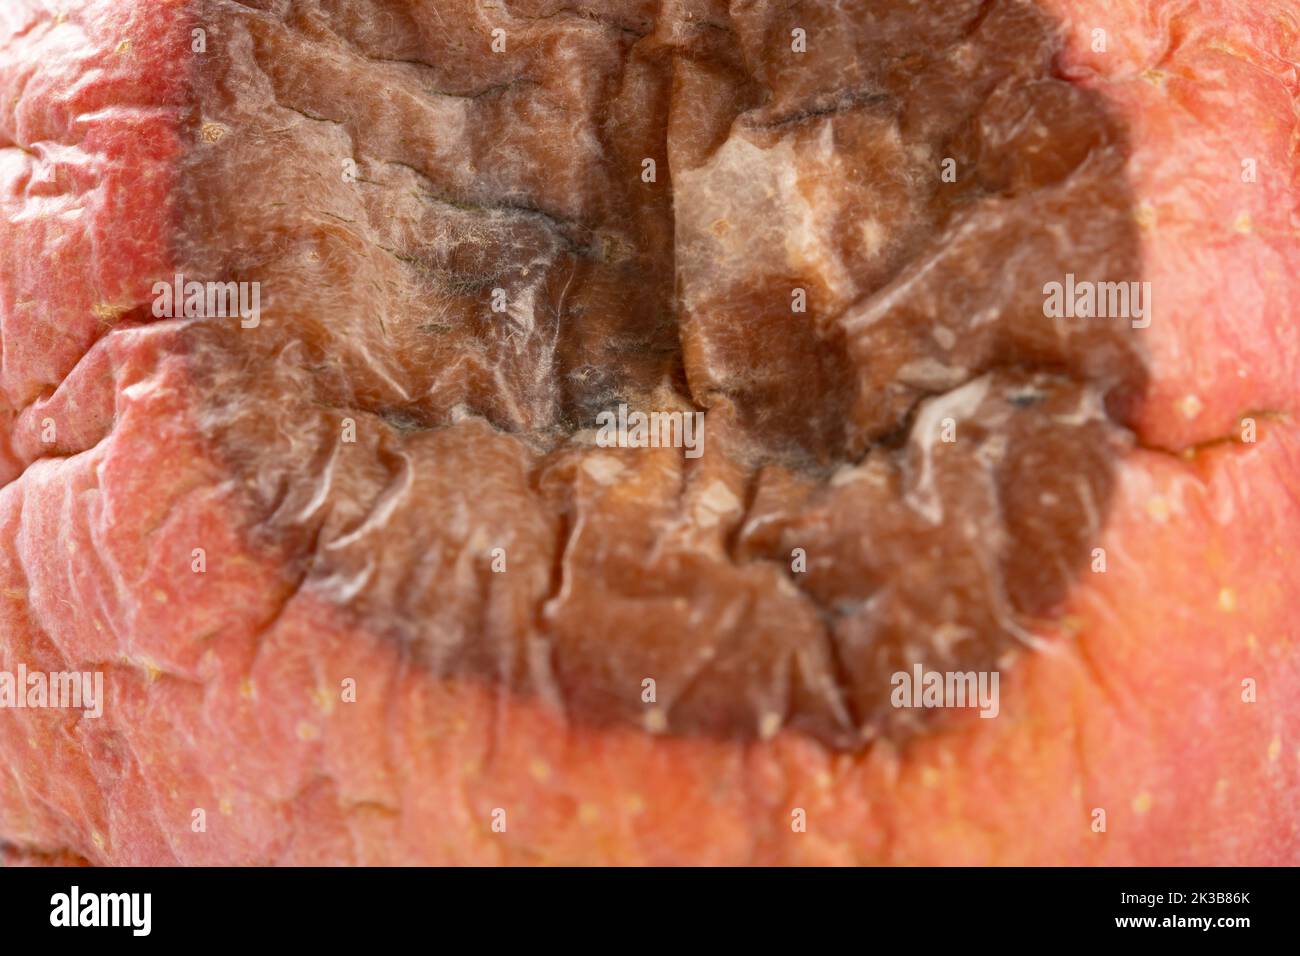 badly rotten apple close up horizontal composition Stock Photo